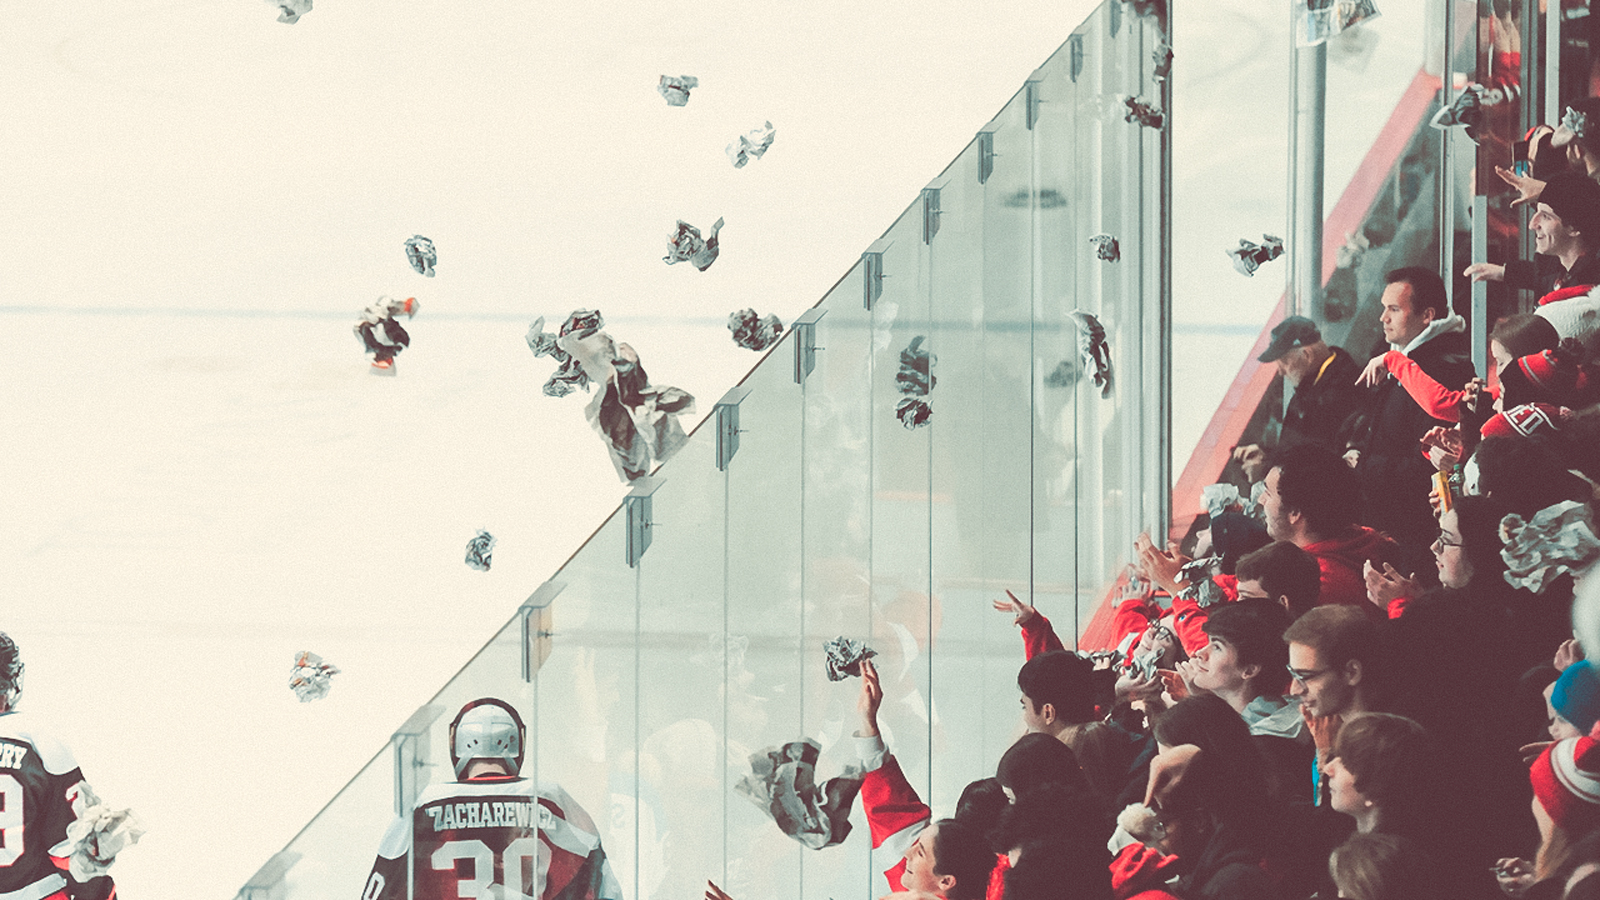 A Cornell University hockey game where fans are throwing crumpled pieces of newspaper onto the ice.